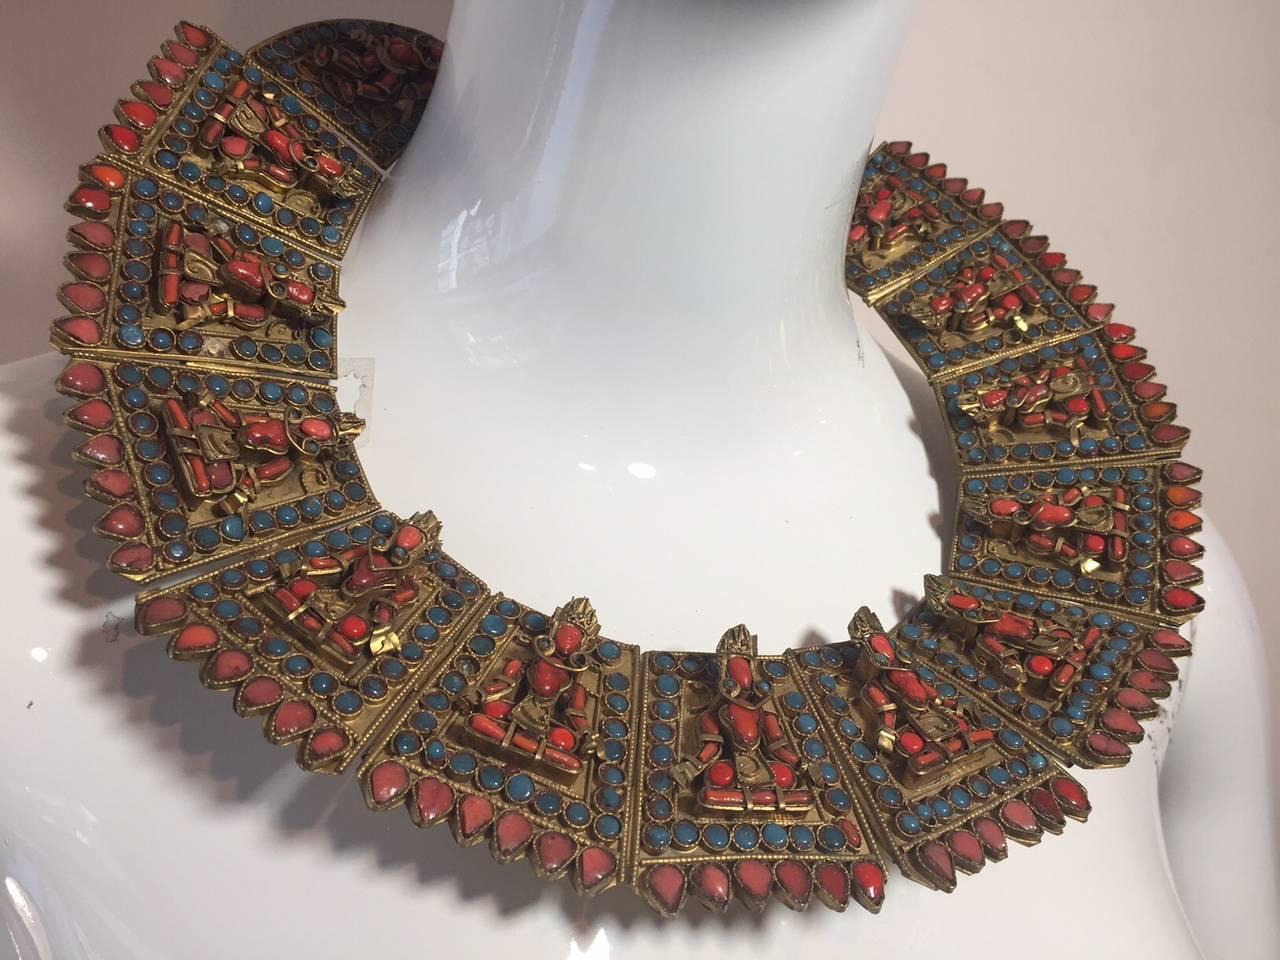 A stunning jointed and hinged antique ethnic bib collar necklace w/ coral and glass inset stones and figures.  Hook closure and base metal with gold plating.